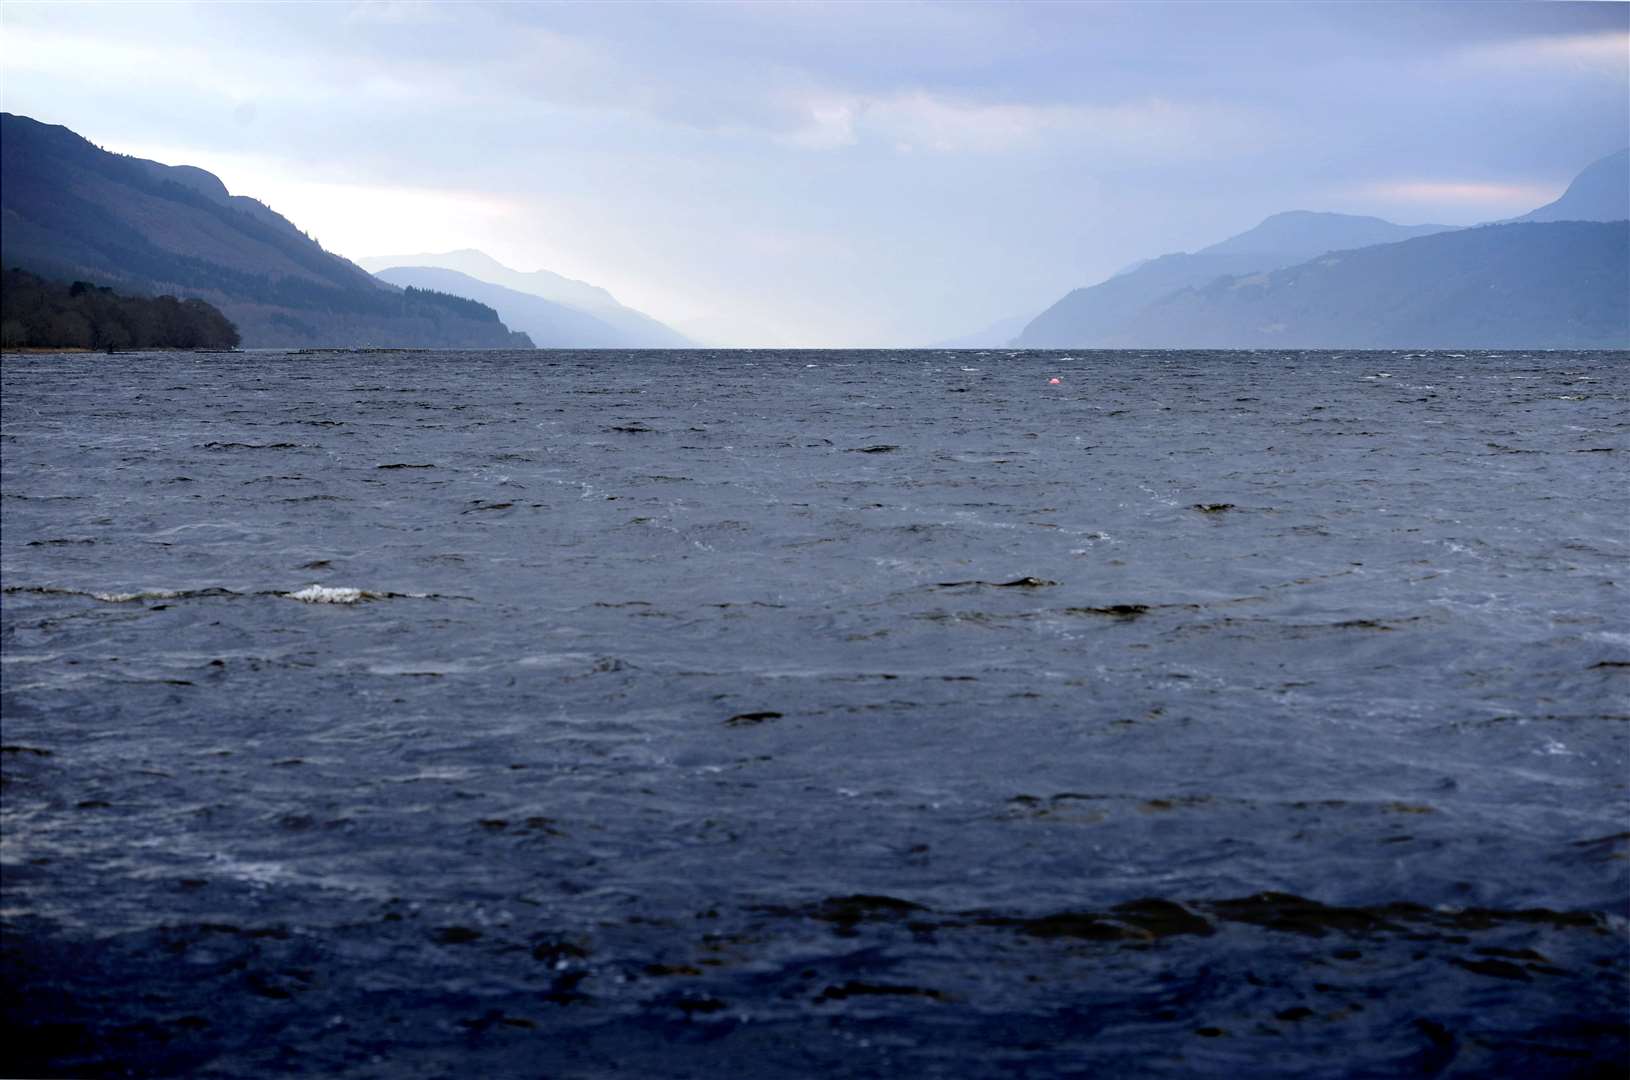 The research considered Loch Ness to have a safe quality of water for swimming.